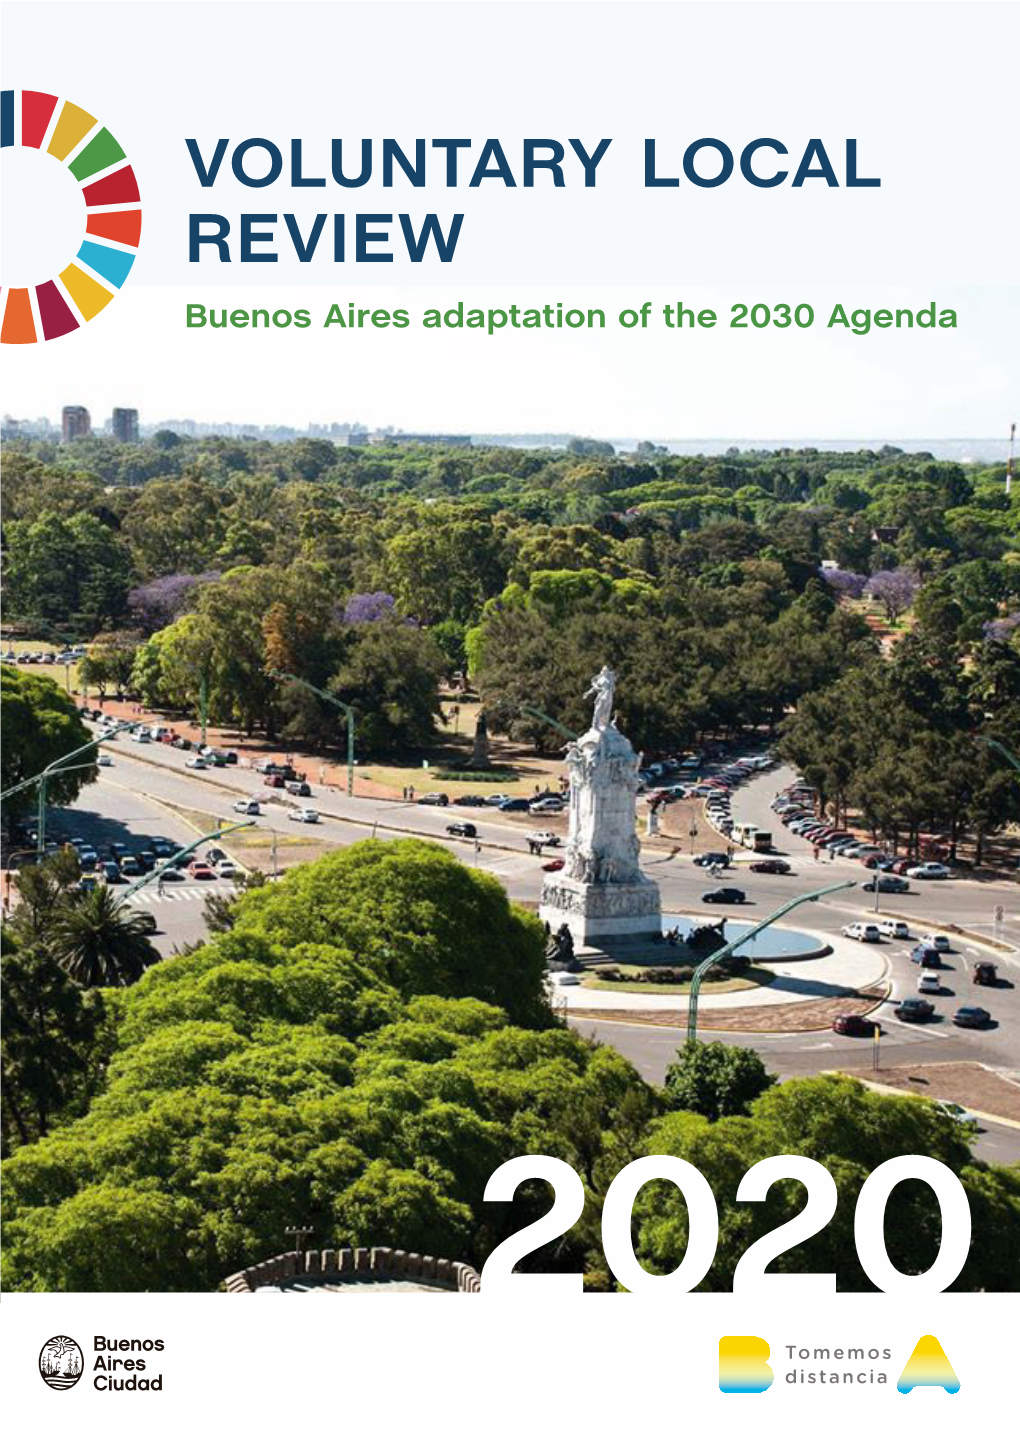 VOLUNTARY LOCAL REVIEW Buenos Aires Adaptation of the 2030 Agenda